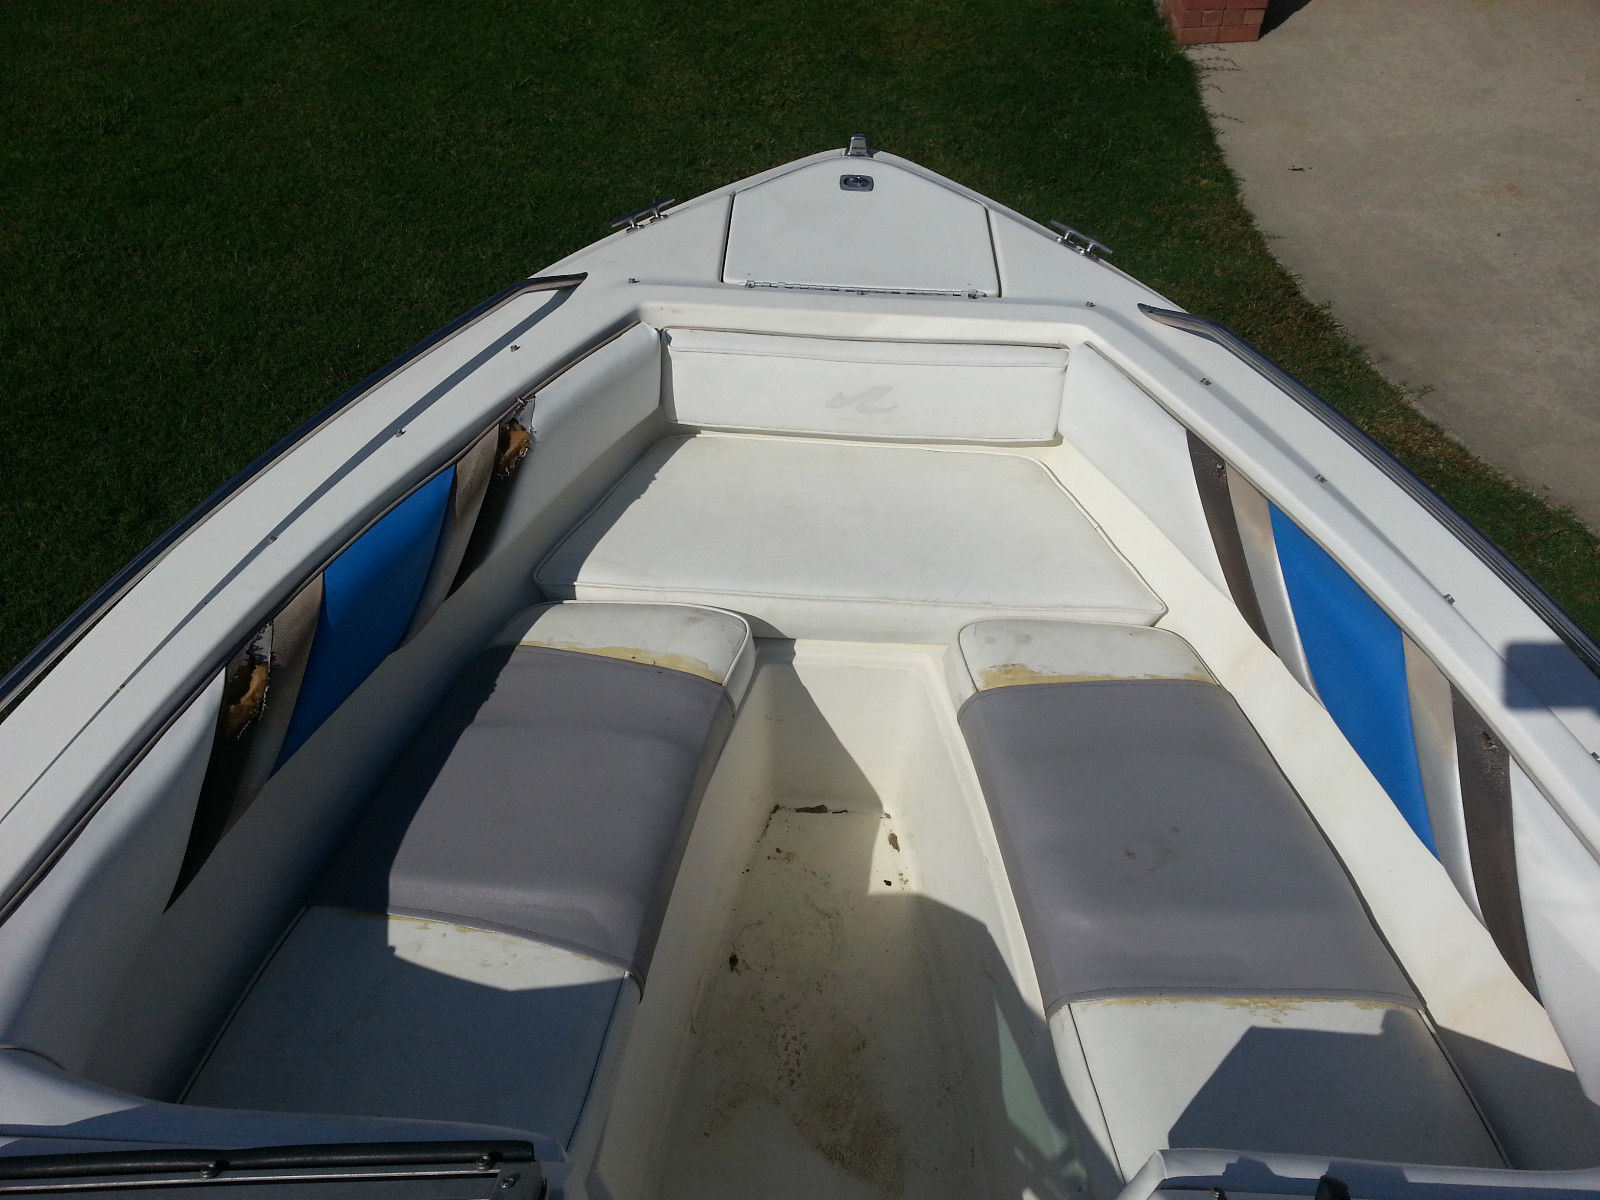 Sea Ray 190 1990 for sale for $4,300 - Boats-from-USA.com